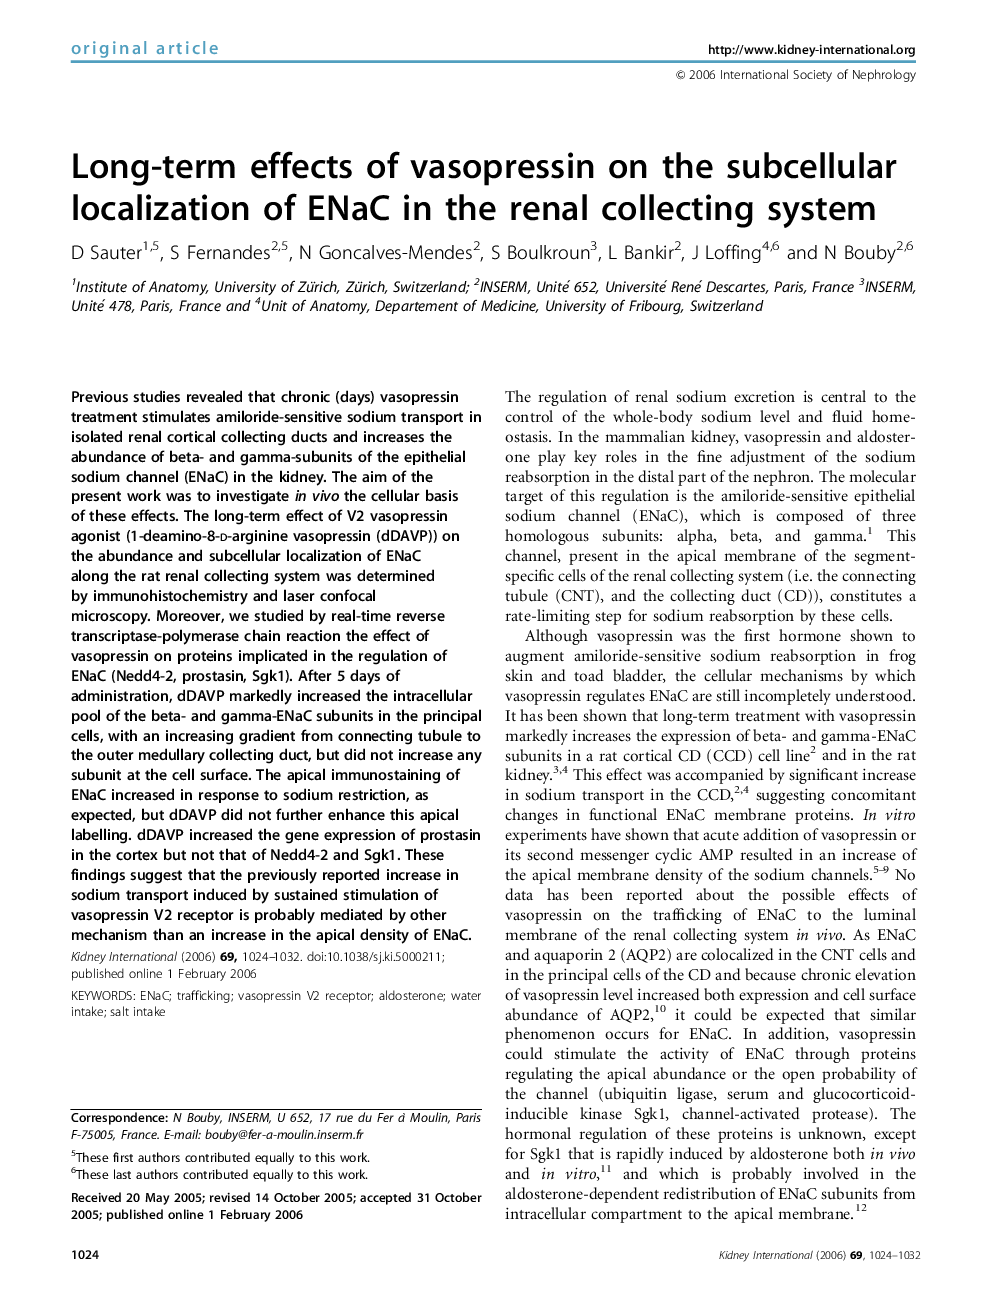 Long-term effects of vasopressin on the subcellular localization of ENaC in the renal collecting system